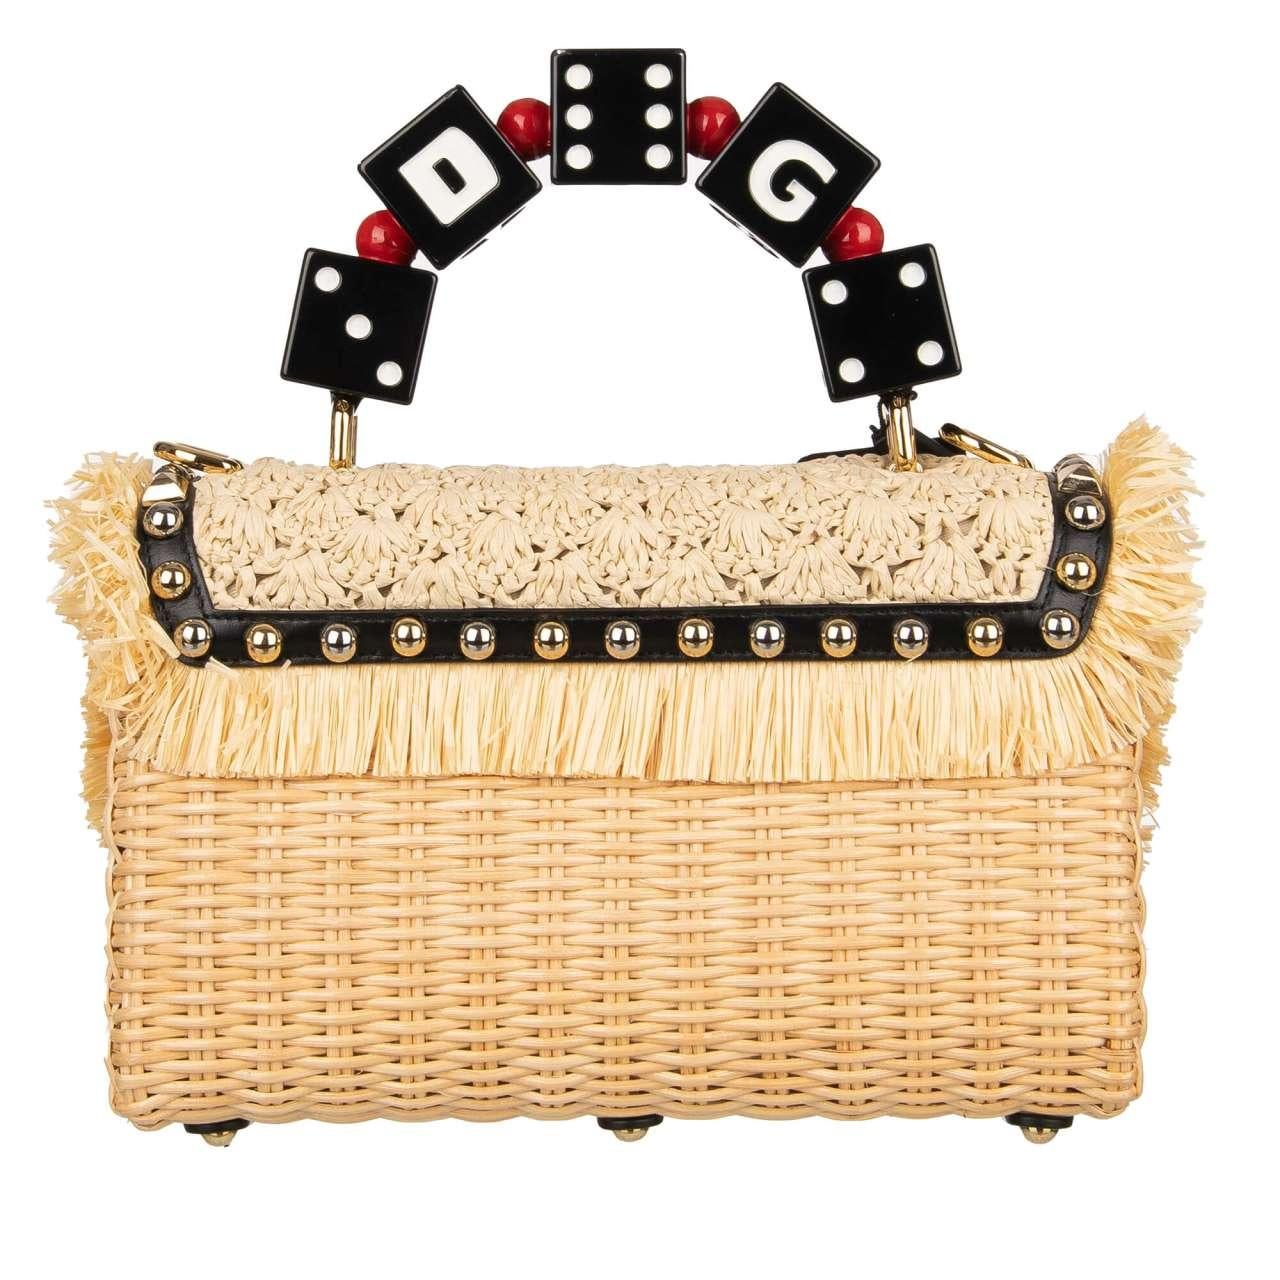 D&G Raffia Straw Shoulder Bag LUCIA with Studs and Dices Handle Beige Black In Excellent Condition For Sale In Erkrath, DE